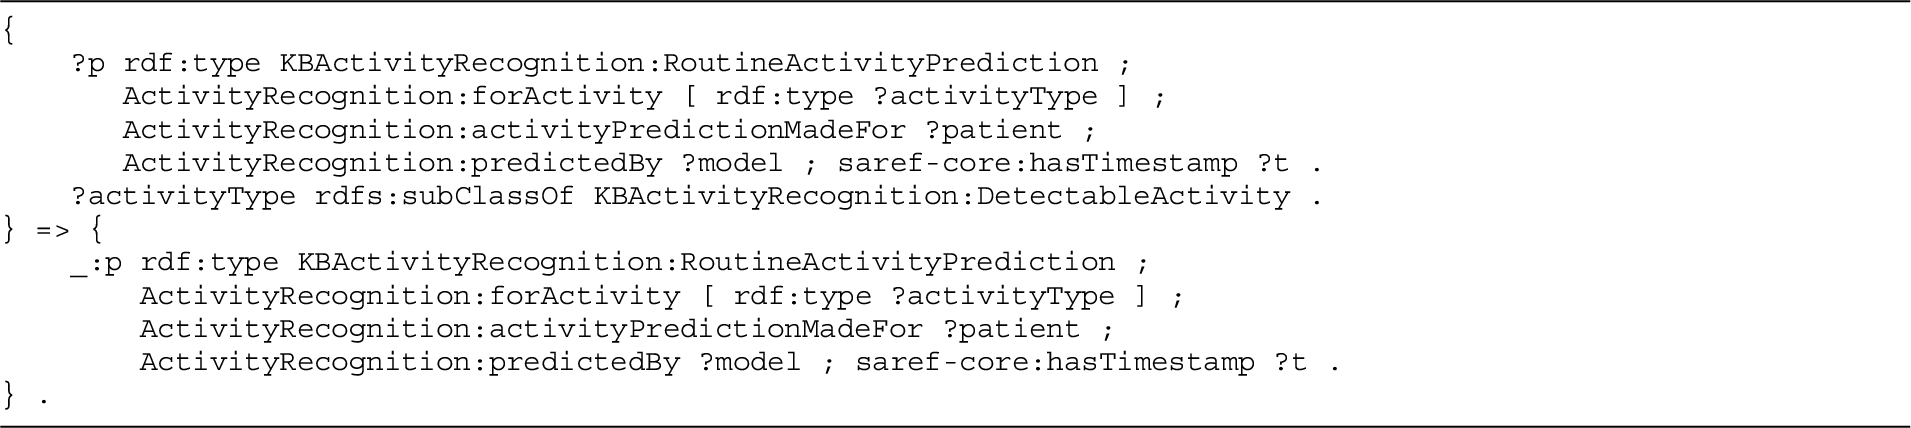 Goal of the generic DIVIDE query detecting an ongoing activity in a patient’s routine.